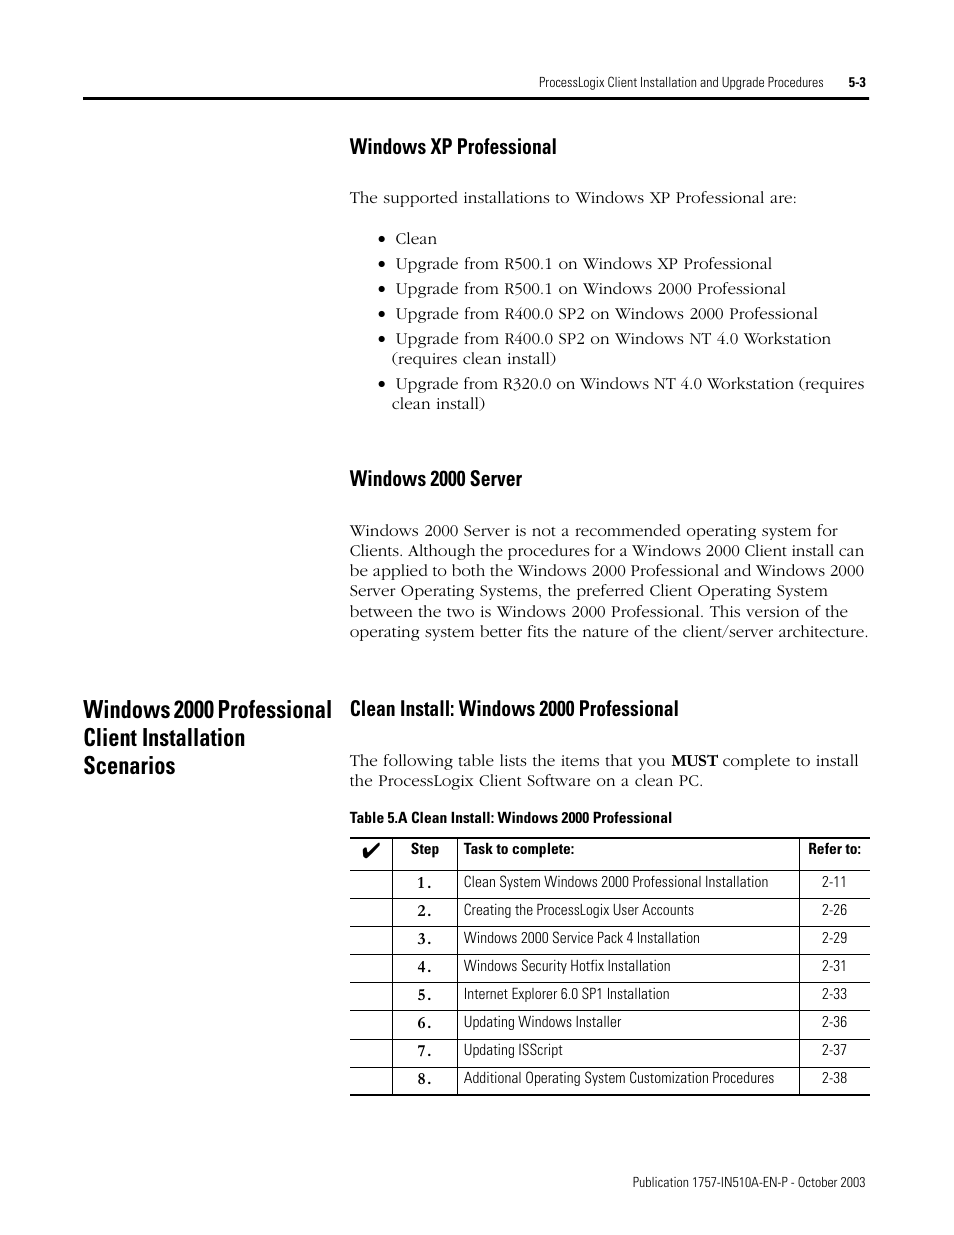 Windows xp professional, Windows 2000 server, Clean install: windows 2000 professional | Windows xp professional -3 windows 2000 server -3, Clean install: windows 2000 professional -3 | Rockwell Automation 1757-SWKIT5100 ProcessLogix R510.0 Installation and Upgrade Guide User Manual | Page 129 / 271